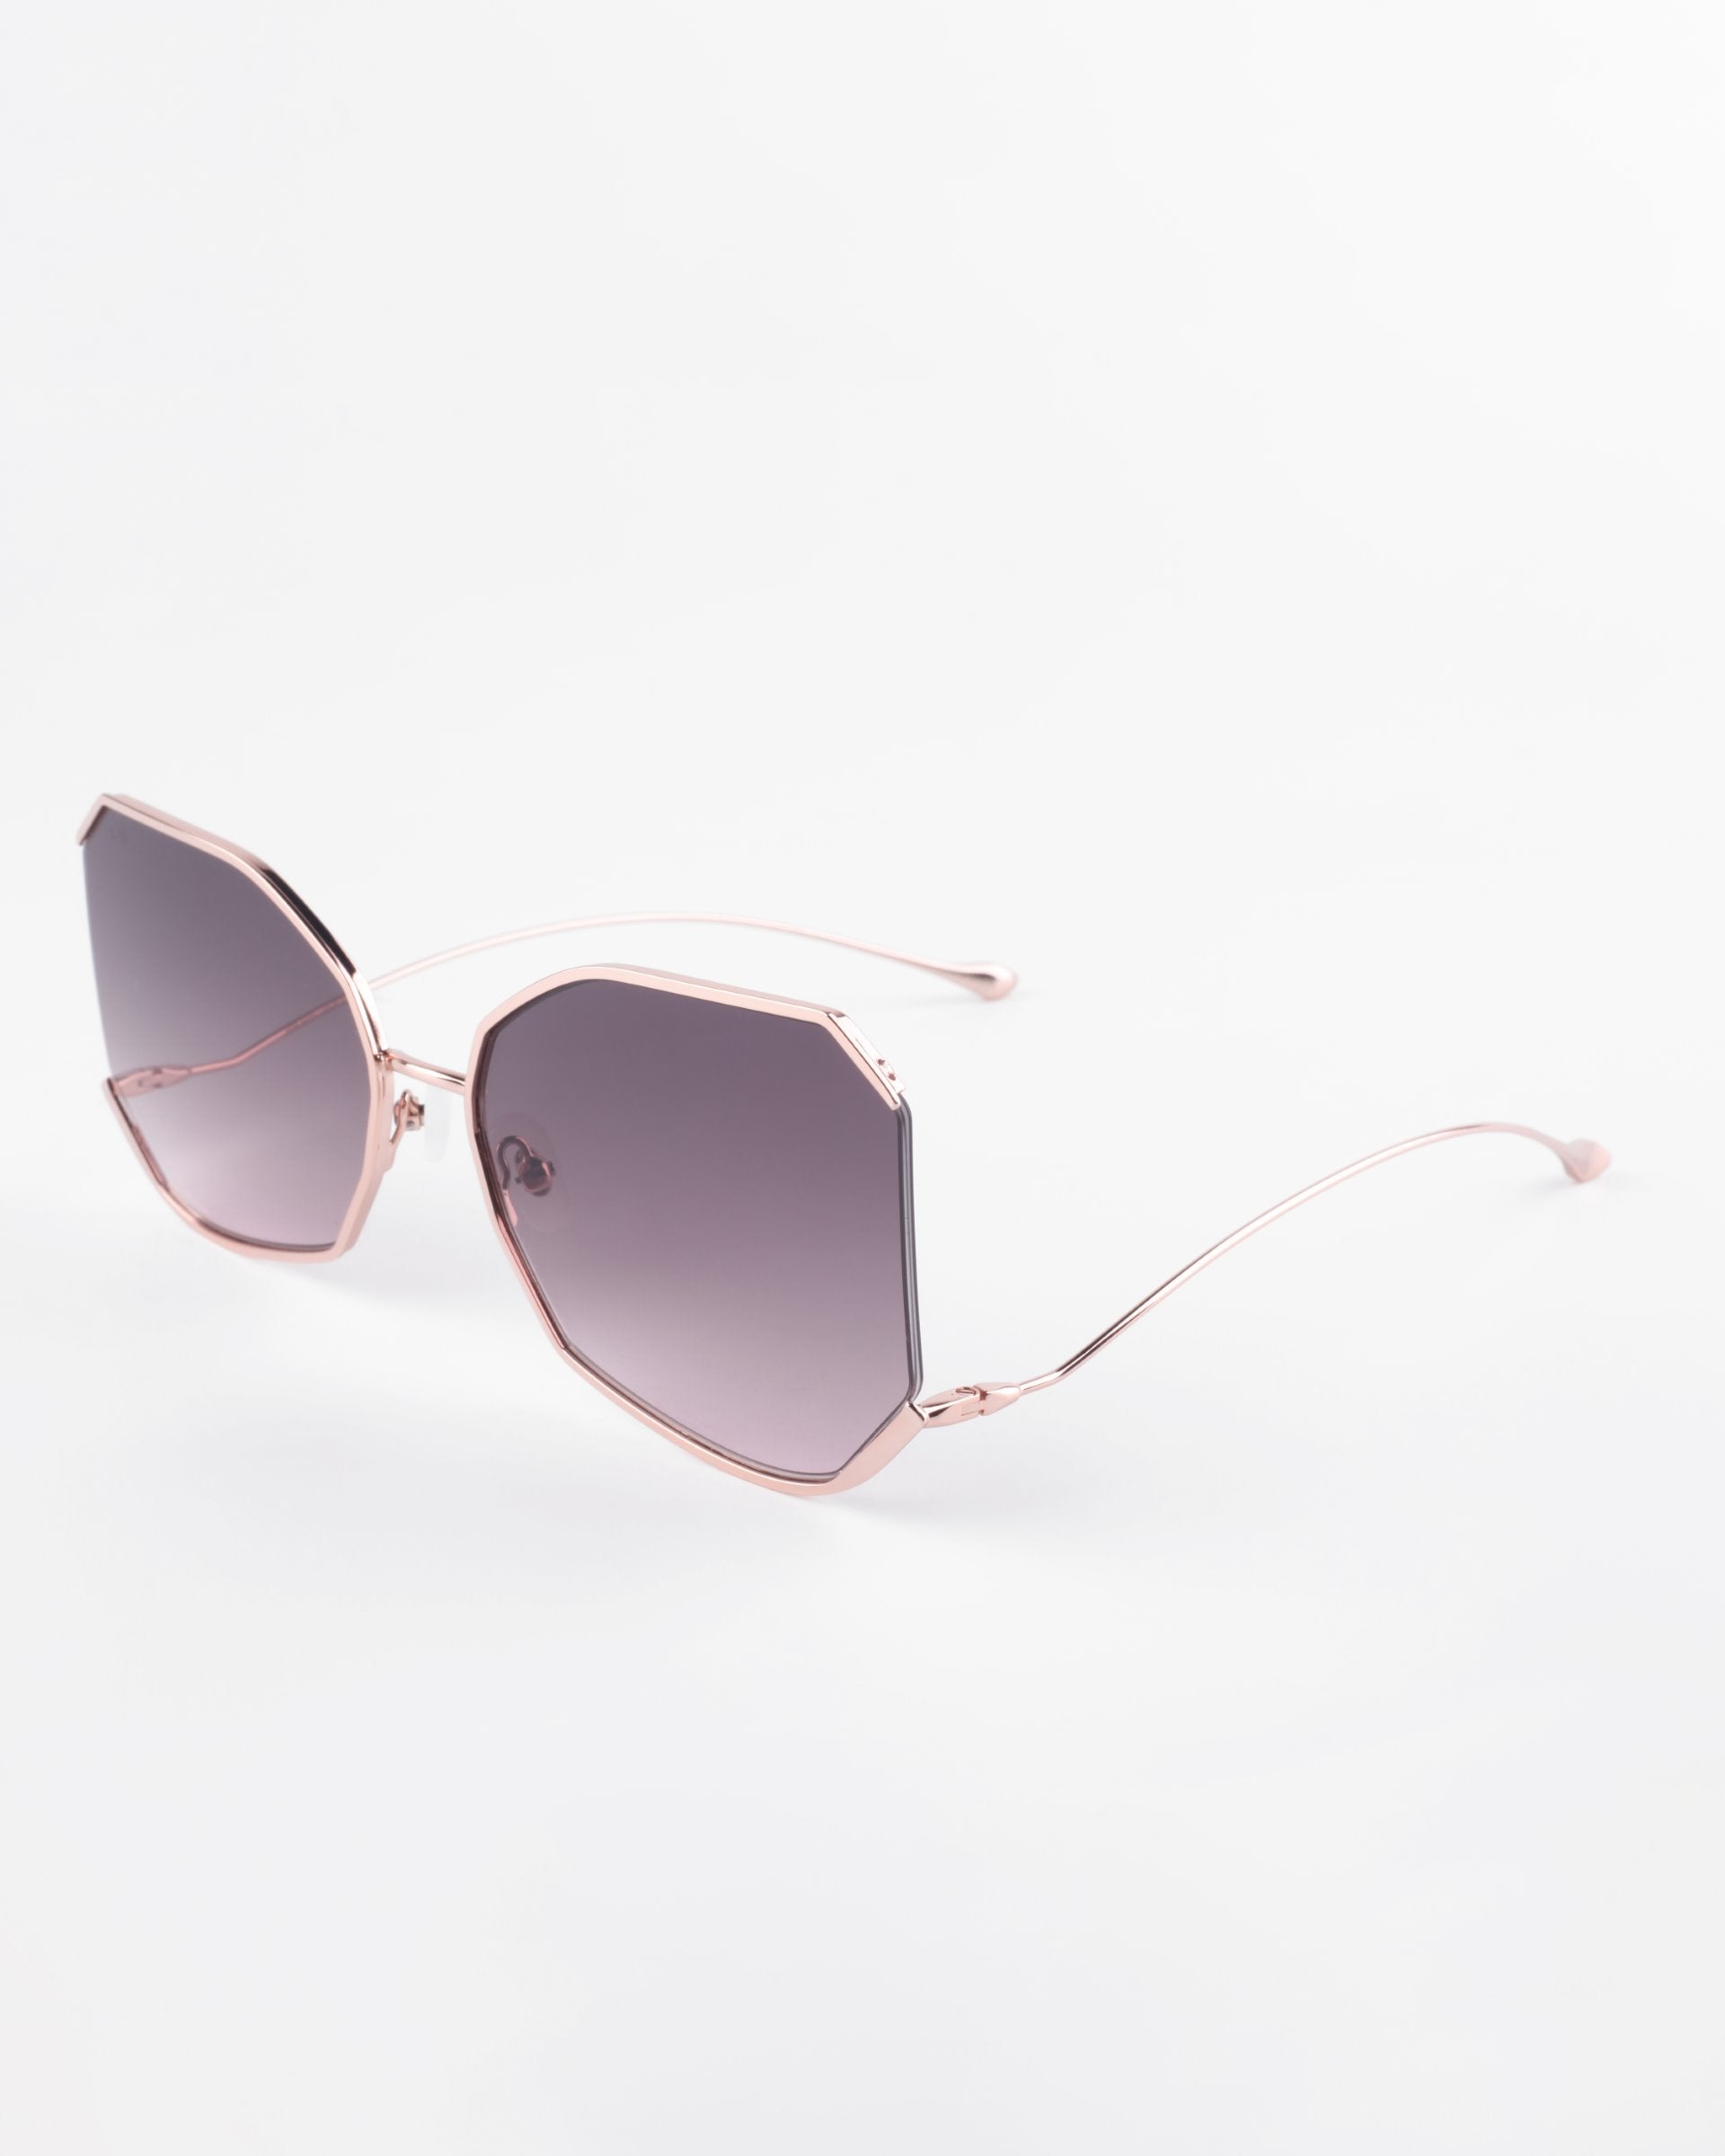 A pair of stylish, oversized Painter sunglasses with a unique hexagonal frame design in rose gold and ultra-lightweight Nylon lenses by For Art&#39;s Sake®. Offering 100% UVA &amp; UVB protection, the gradient lenses transition from dark at the top to lighter at the bottom. The clean, minimalist background emphasizes their elegance.